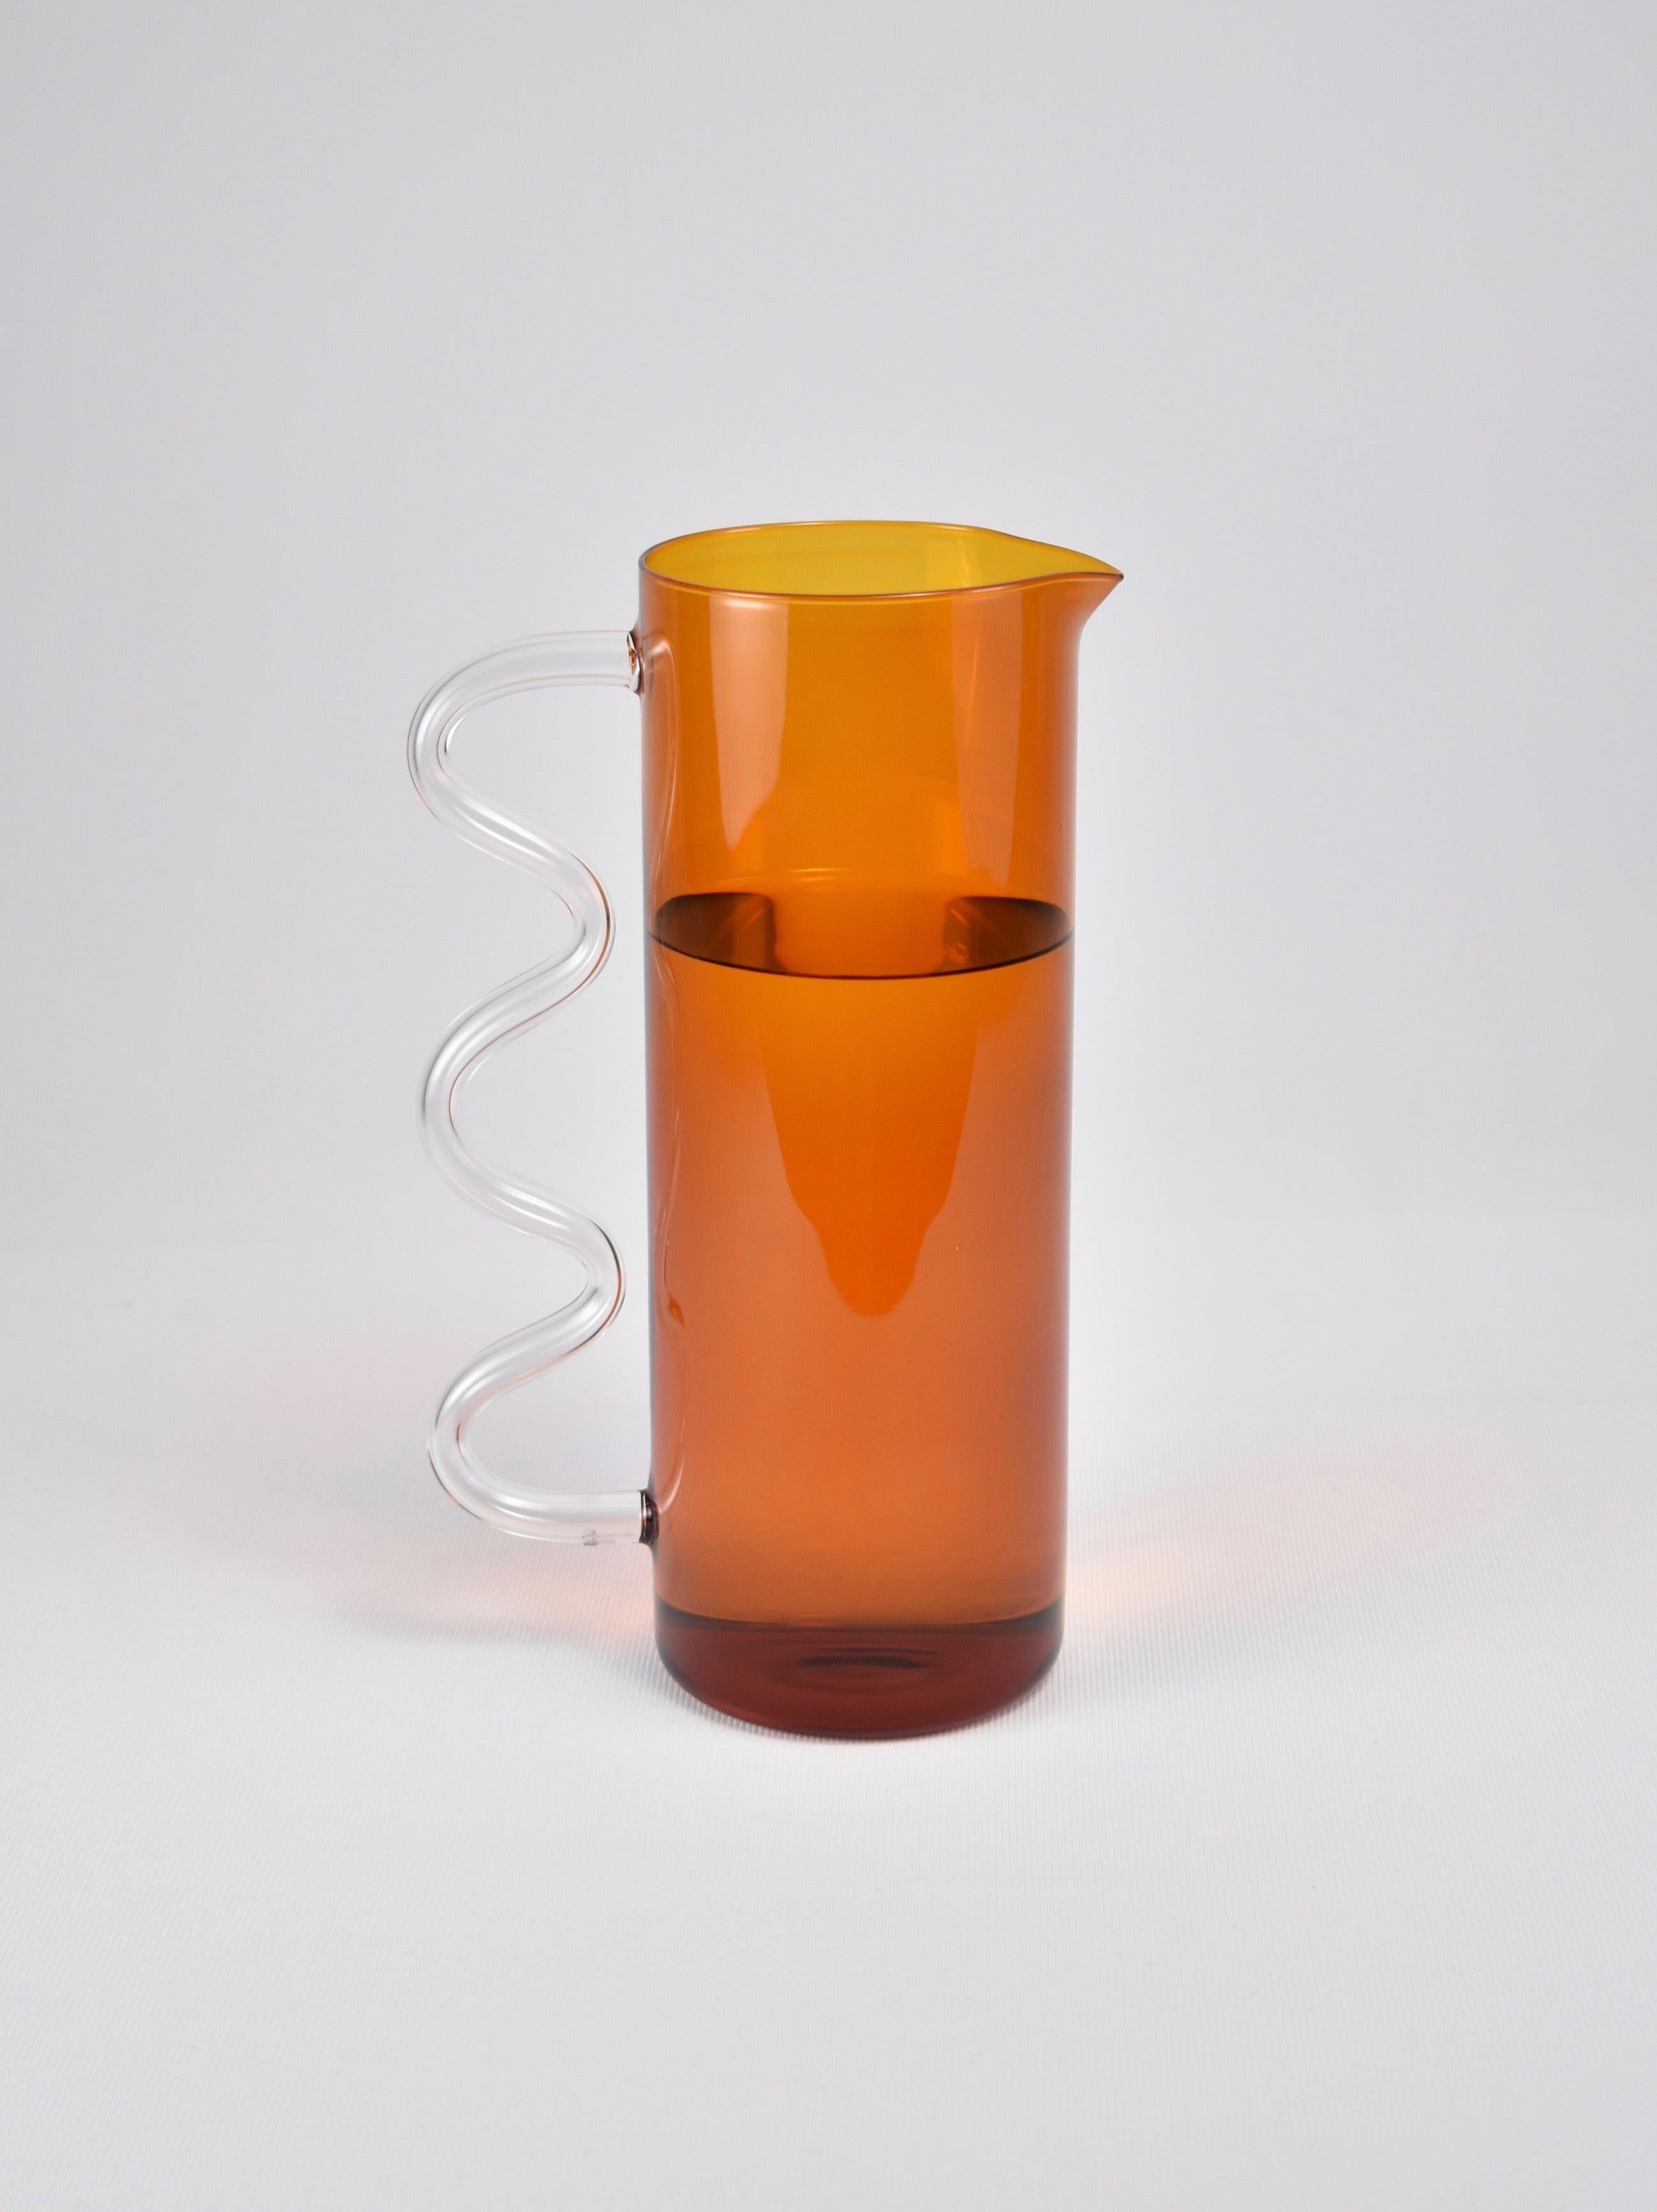 A glass pitcher in amber with a clear wavy handle. May be used for holding flowers, watering plants, a pitcher for juice or any other use you can think of. Designed by Sophie Lou Jacobsen in New York.

Made of lightweight and durable borosilicate